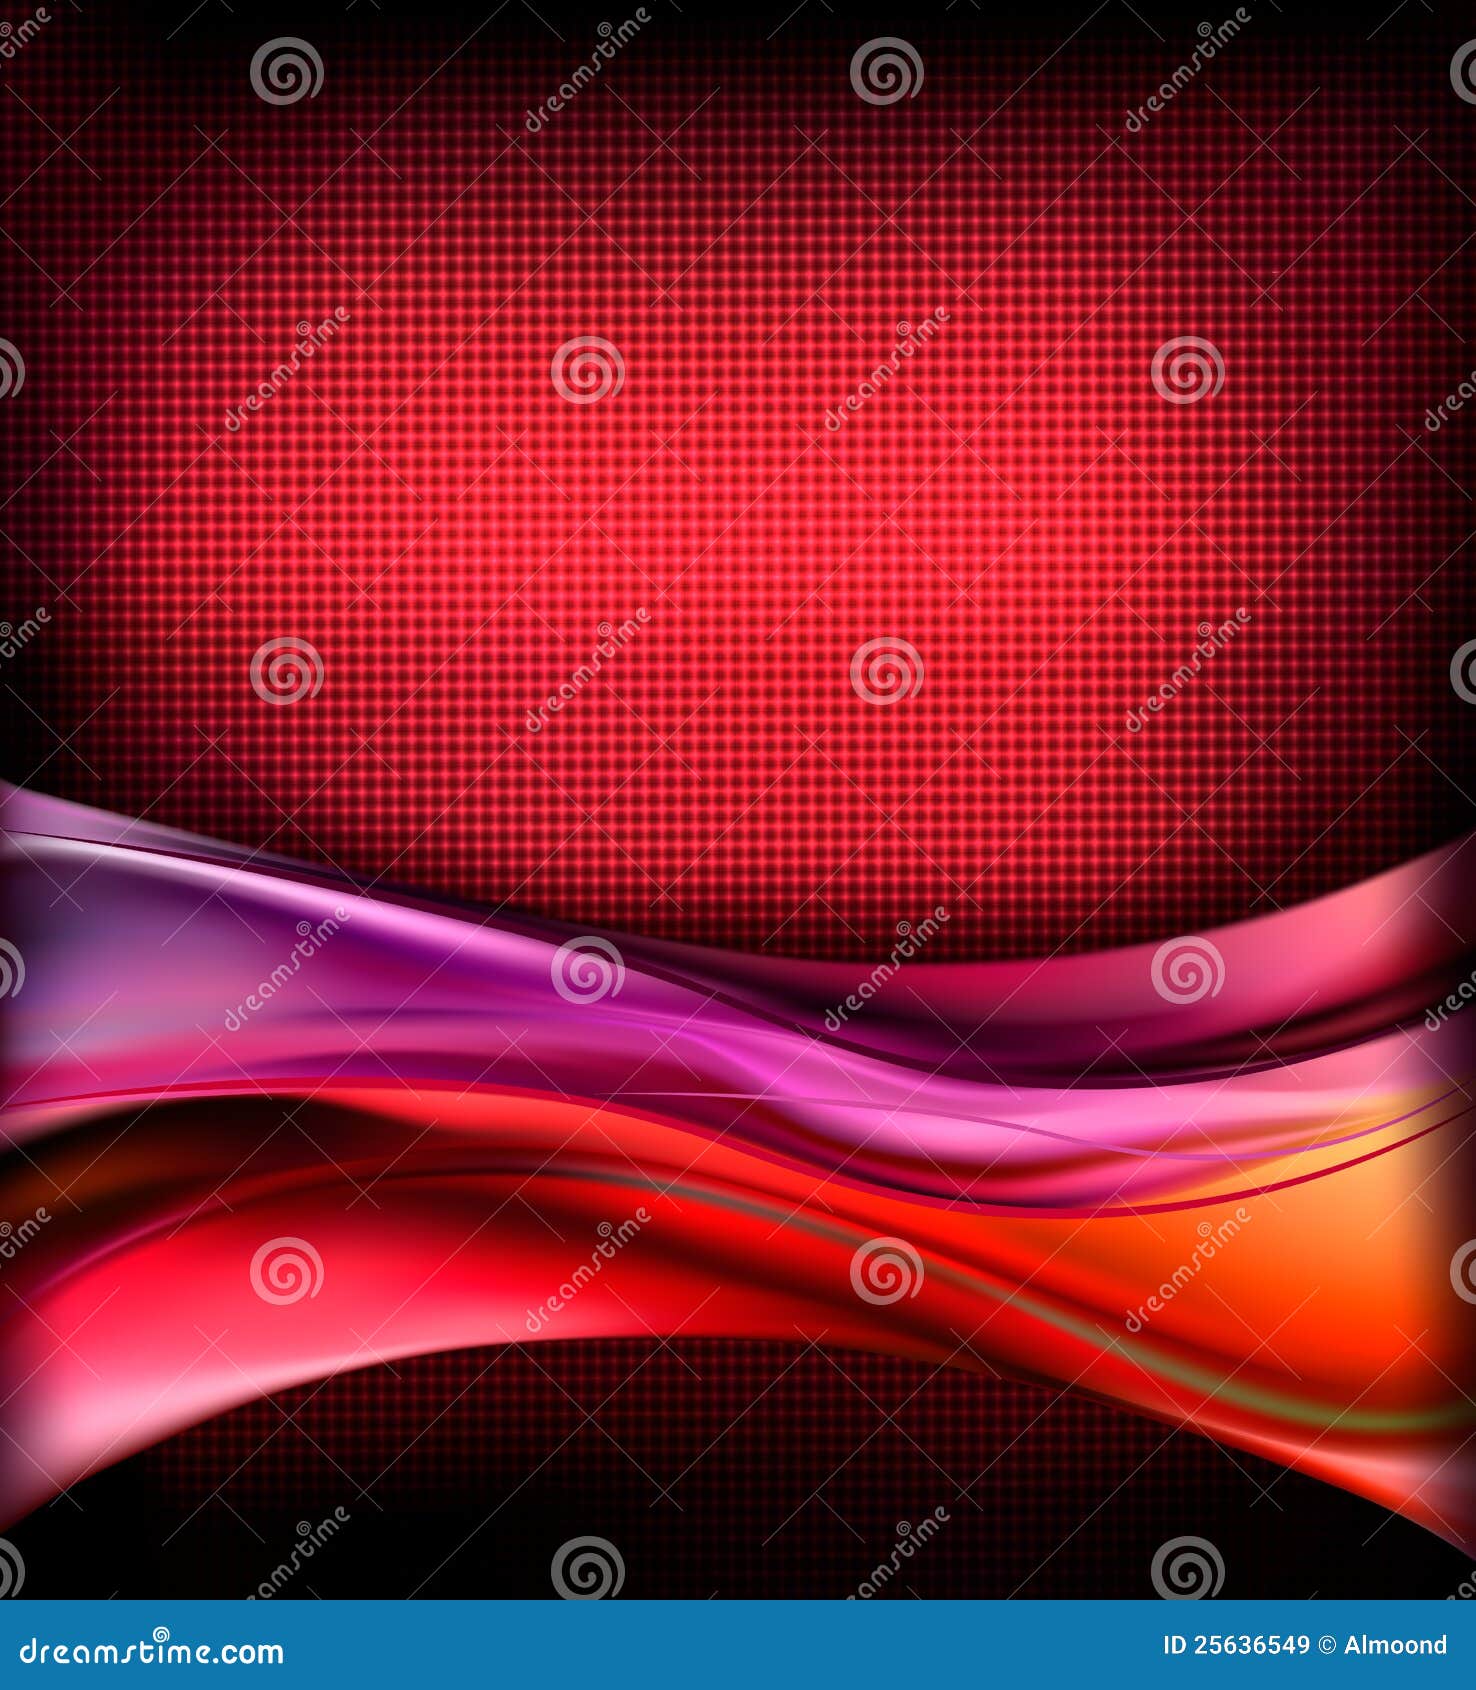 Red Elegant Abstract Background Vector Royalty Free Stock Images